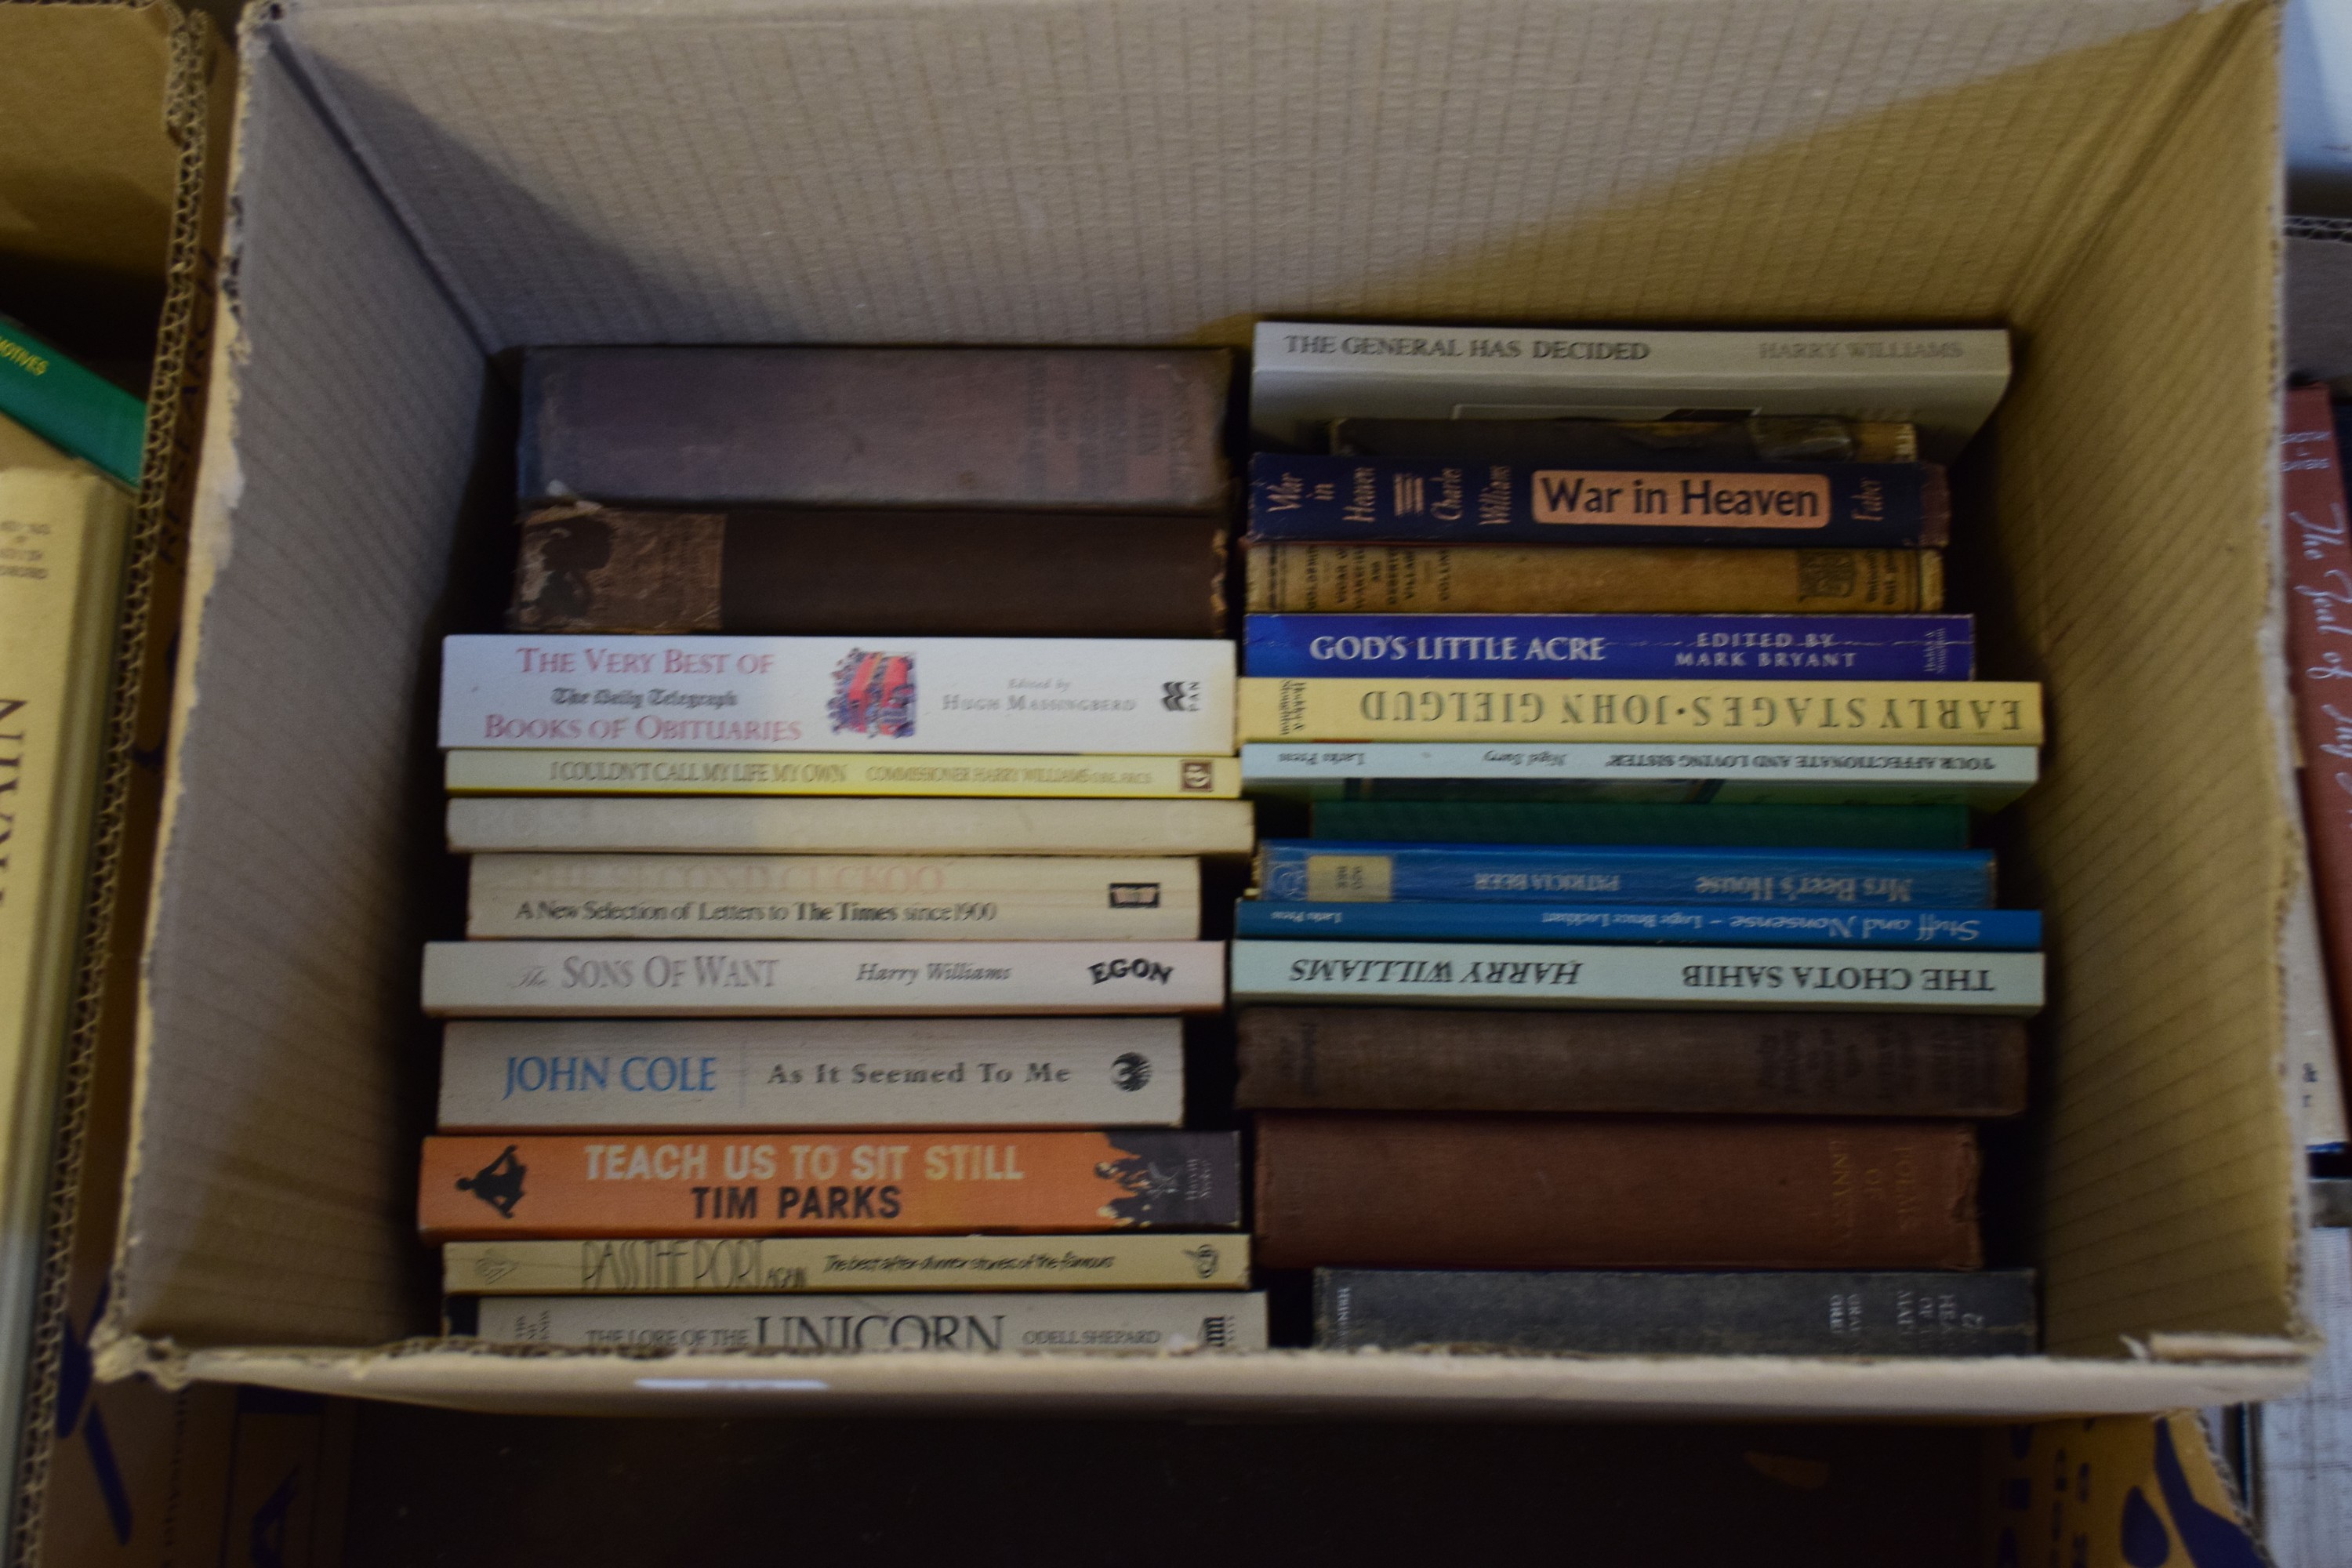 BOX OF MIXED BOOKS TO INCLUDE SONS OF WANT, GOD'S LITTLE ACRE, TEACH US TO SIT STILL ETC